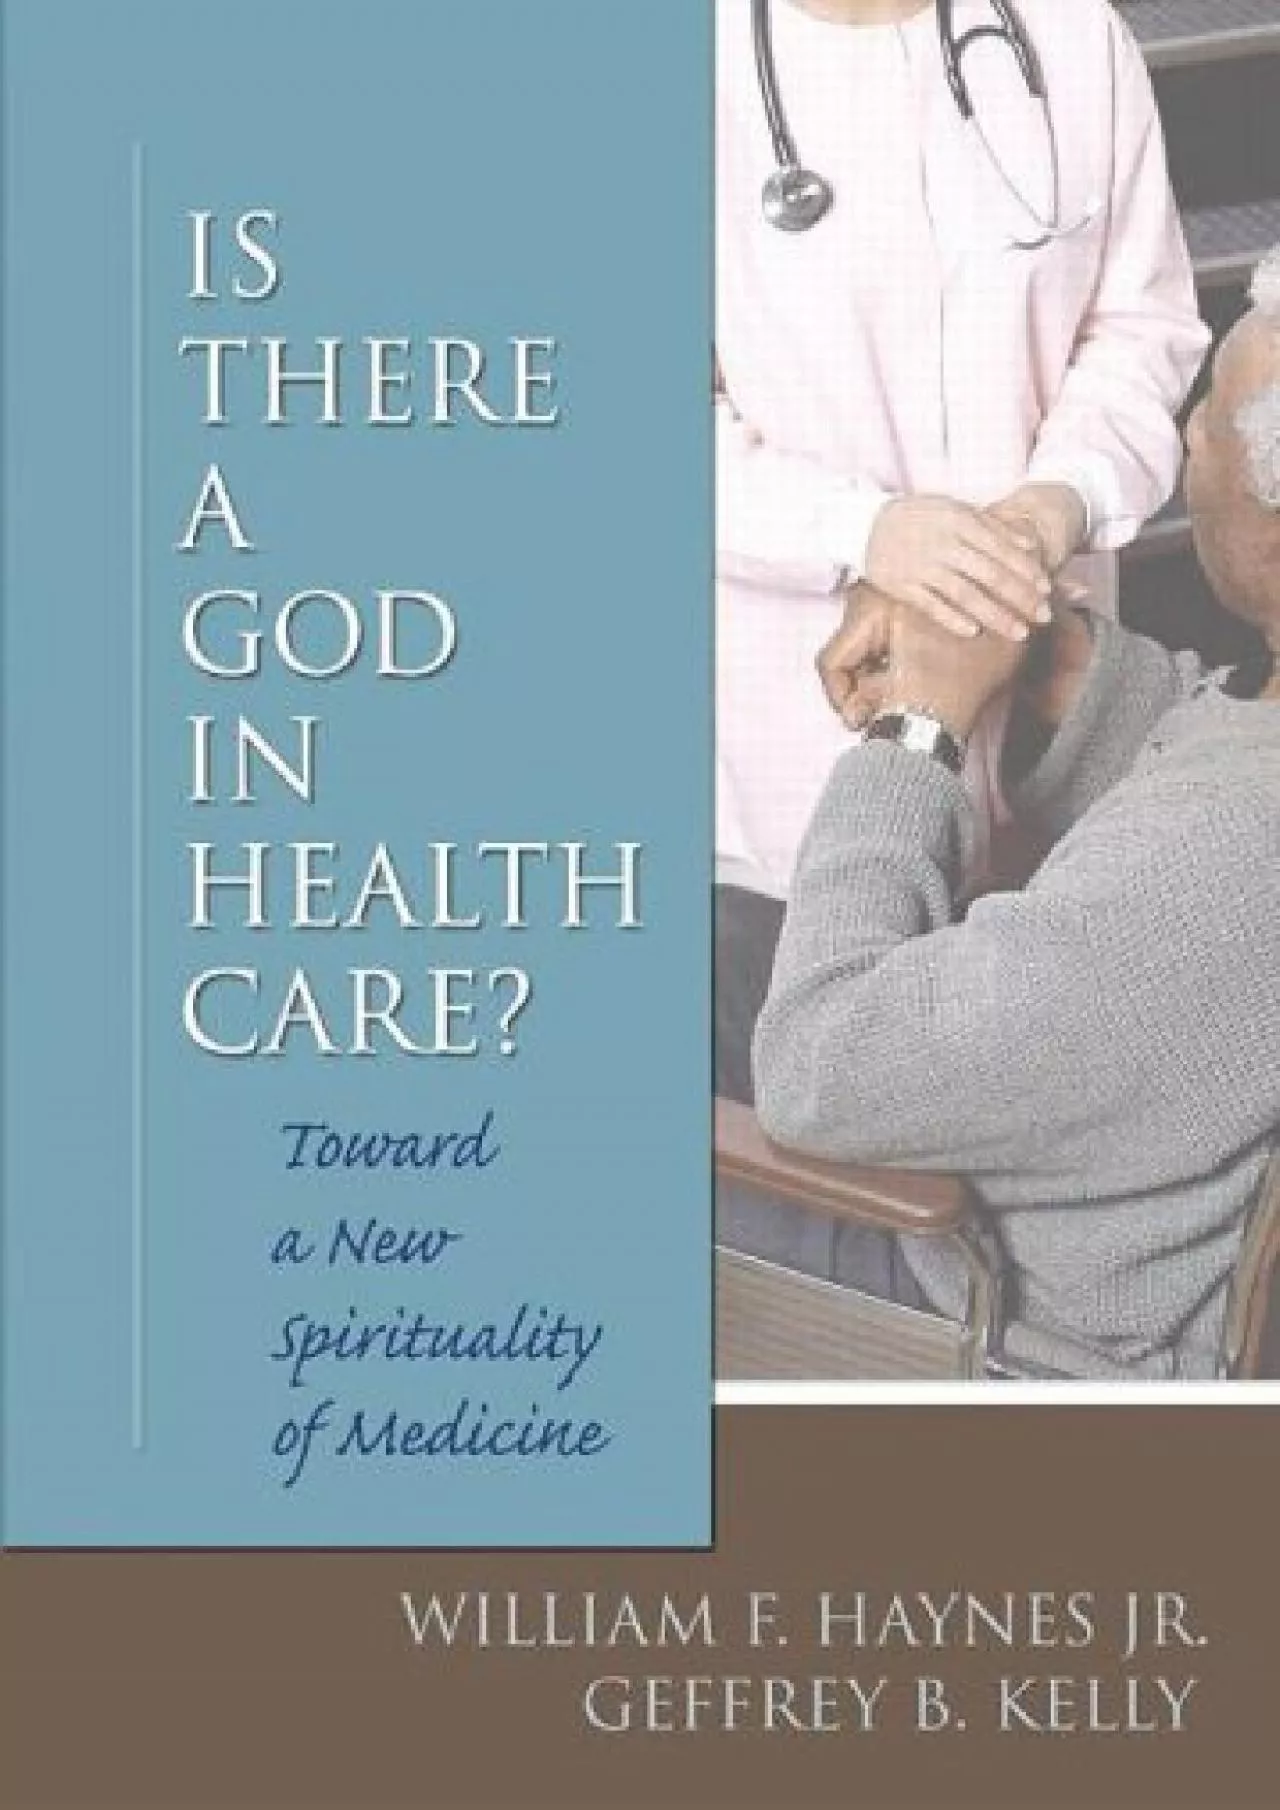 (DOWNLOAD)-Is There a God in Health Care: Toward a New Spirituality of Medicine (Religion